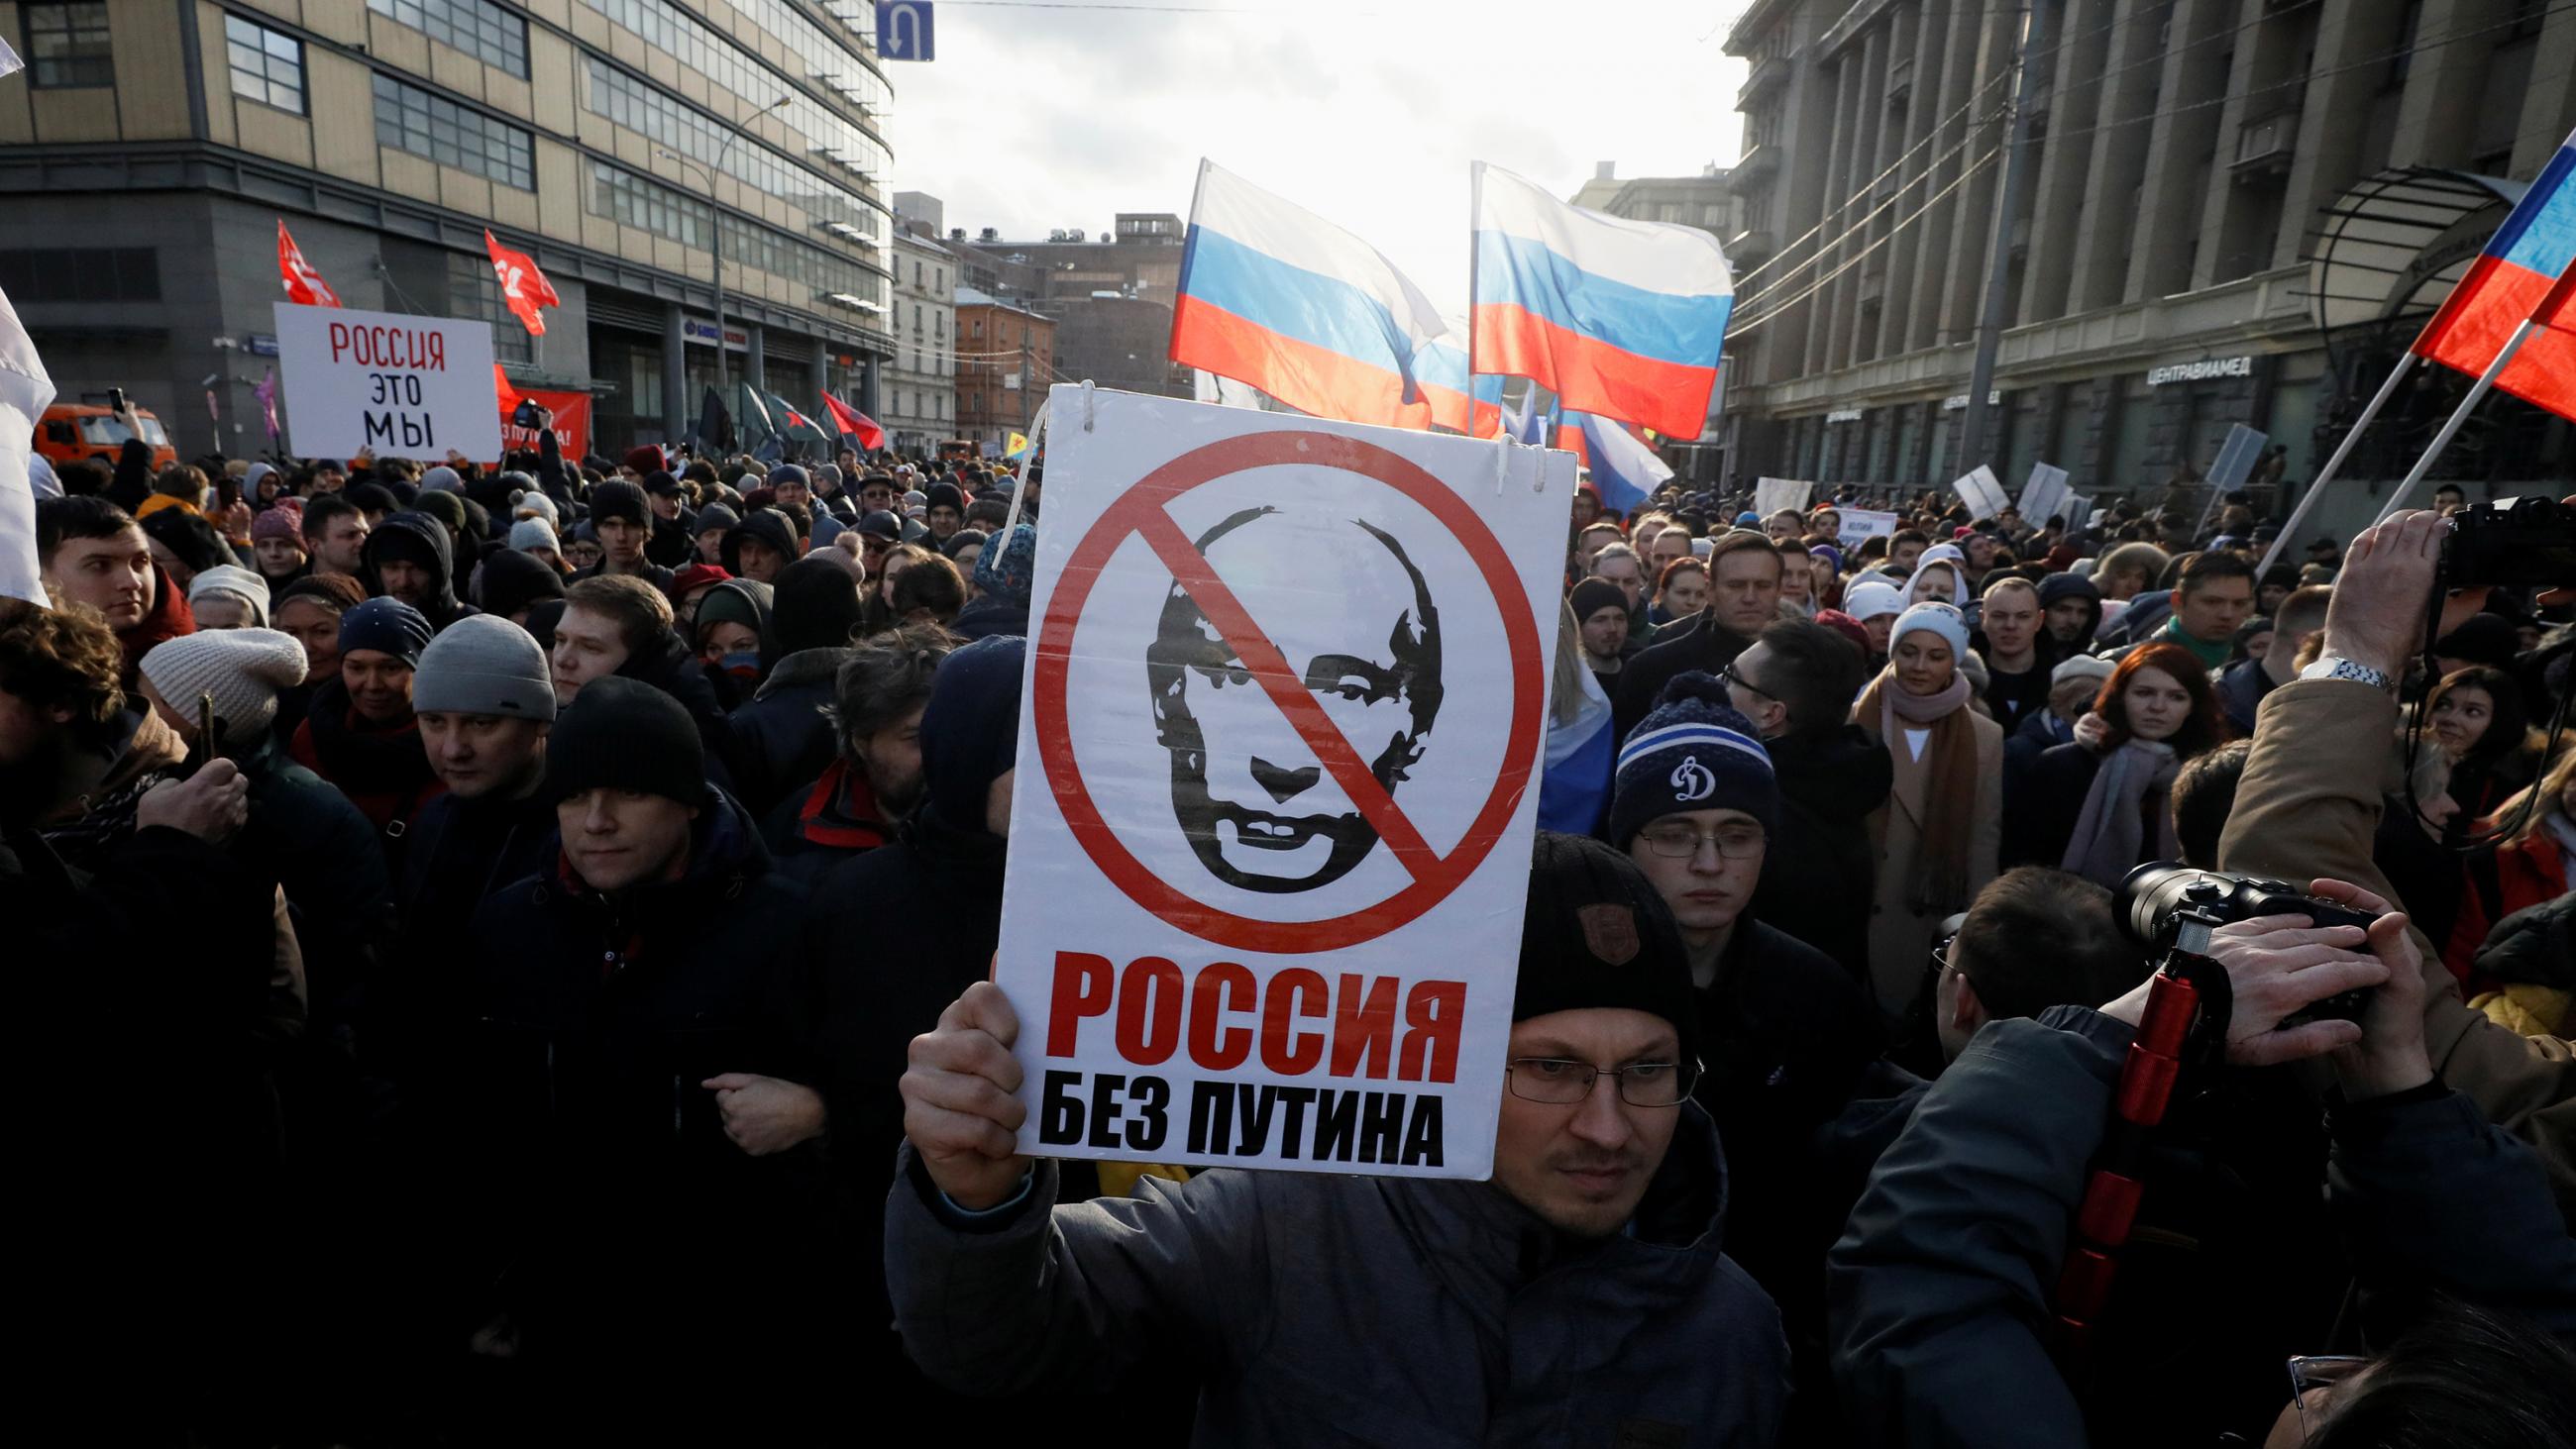 The photo shows a large crowd of marchers. The man in the front holds a placard with a likeness of Vladamir Putin and a red cross over his face. The sign reads: "Russia without Putin." 